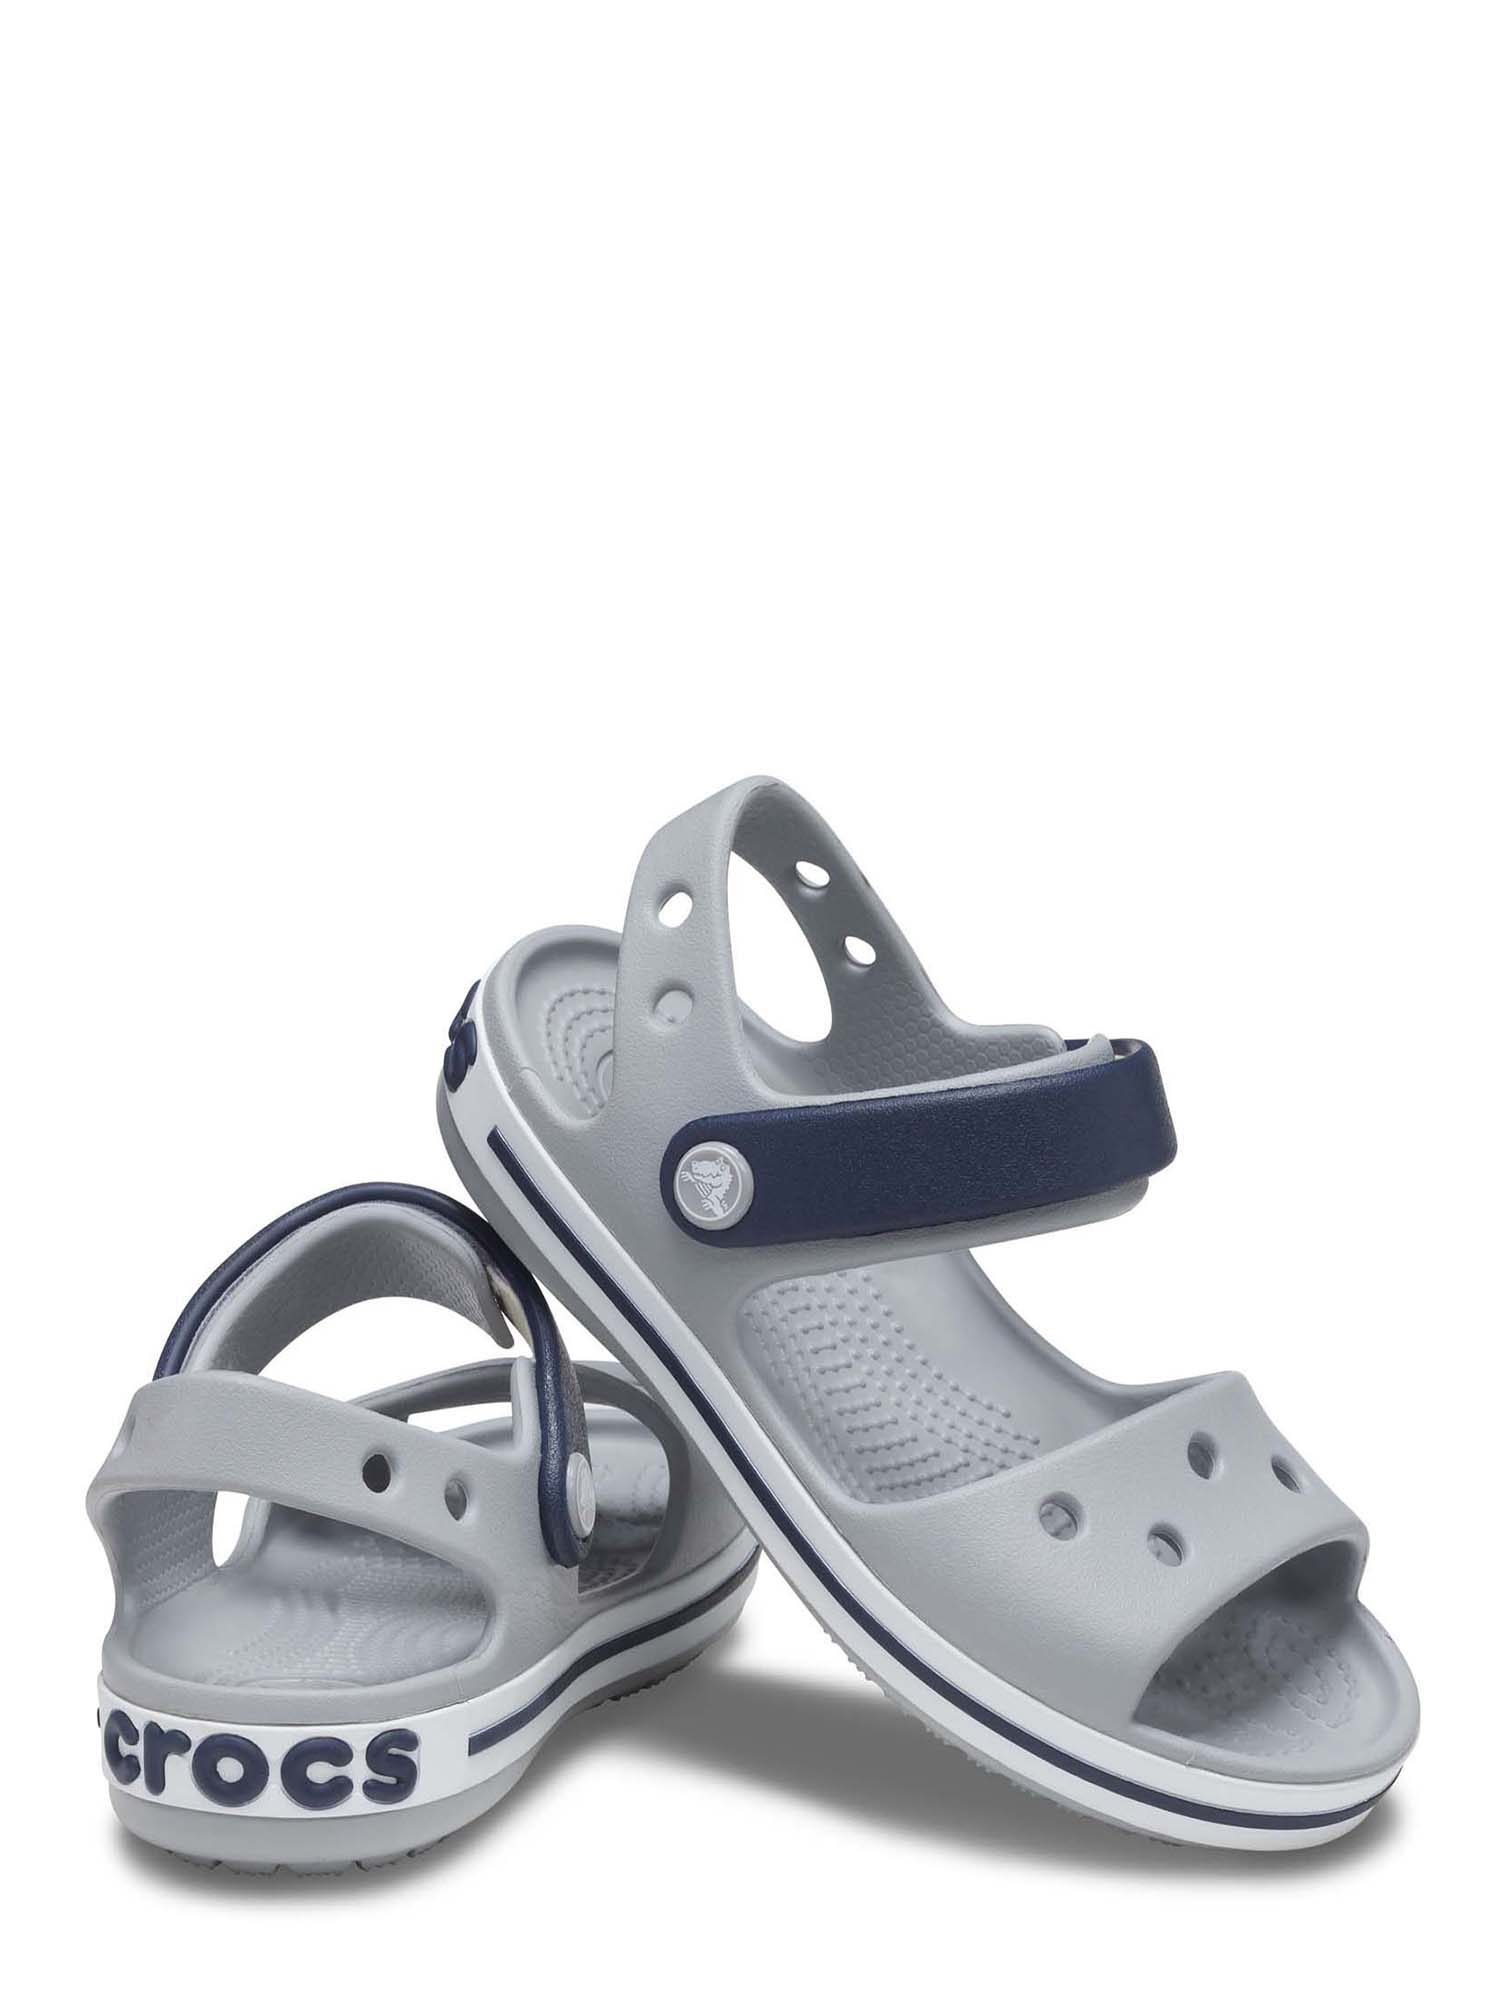 Crocs Toddler and Kids Crocband Cruiser Sandals, Sizes 4-3 - image 3 of 5